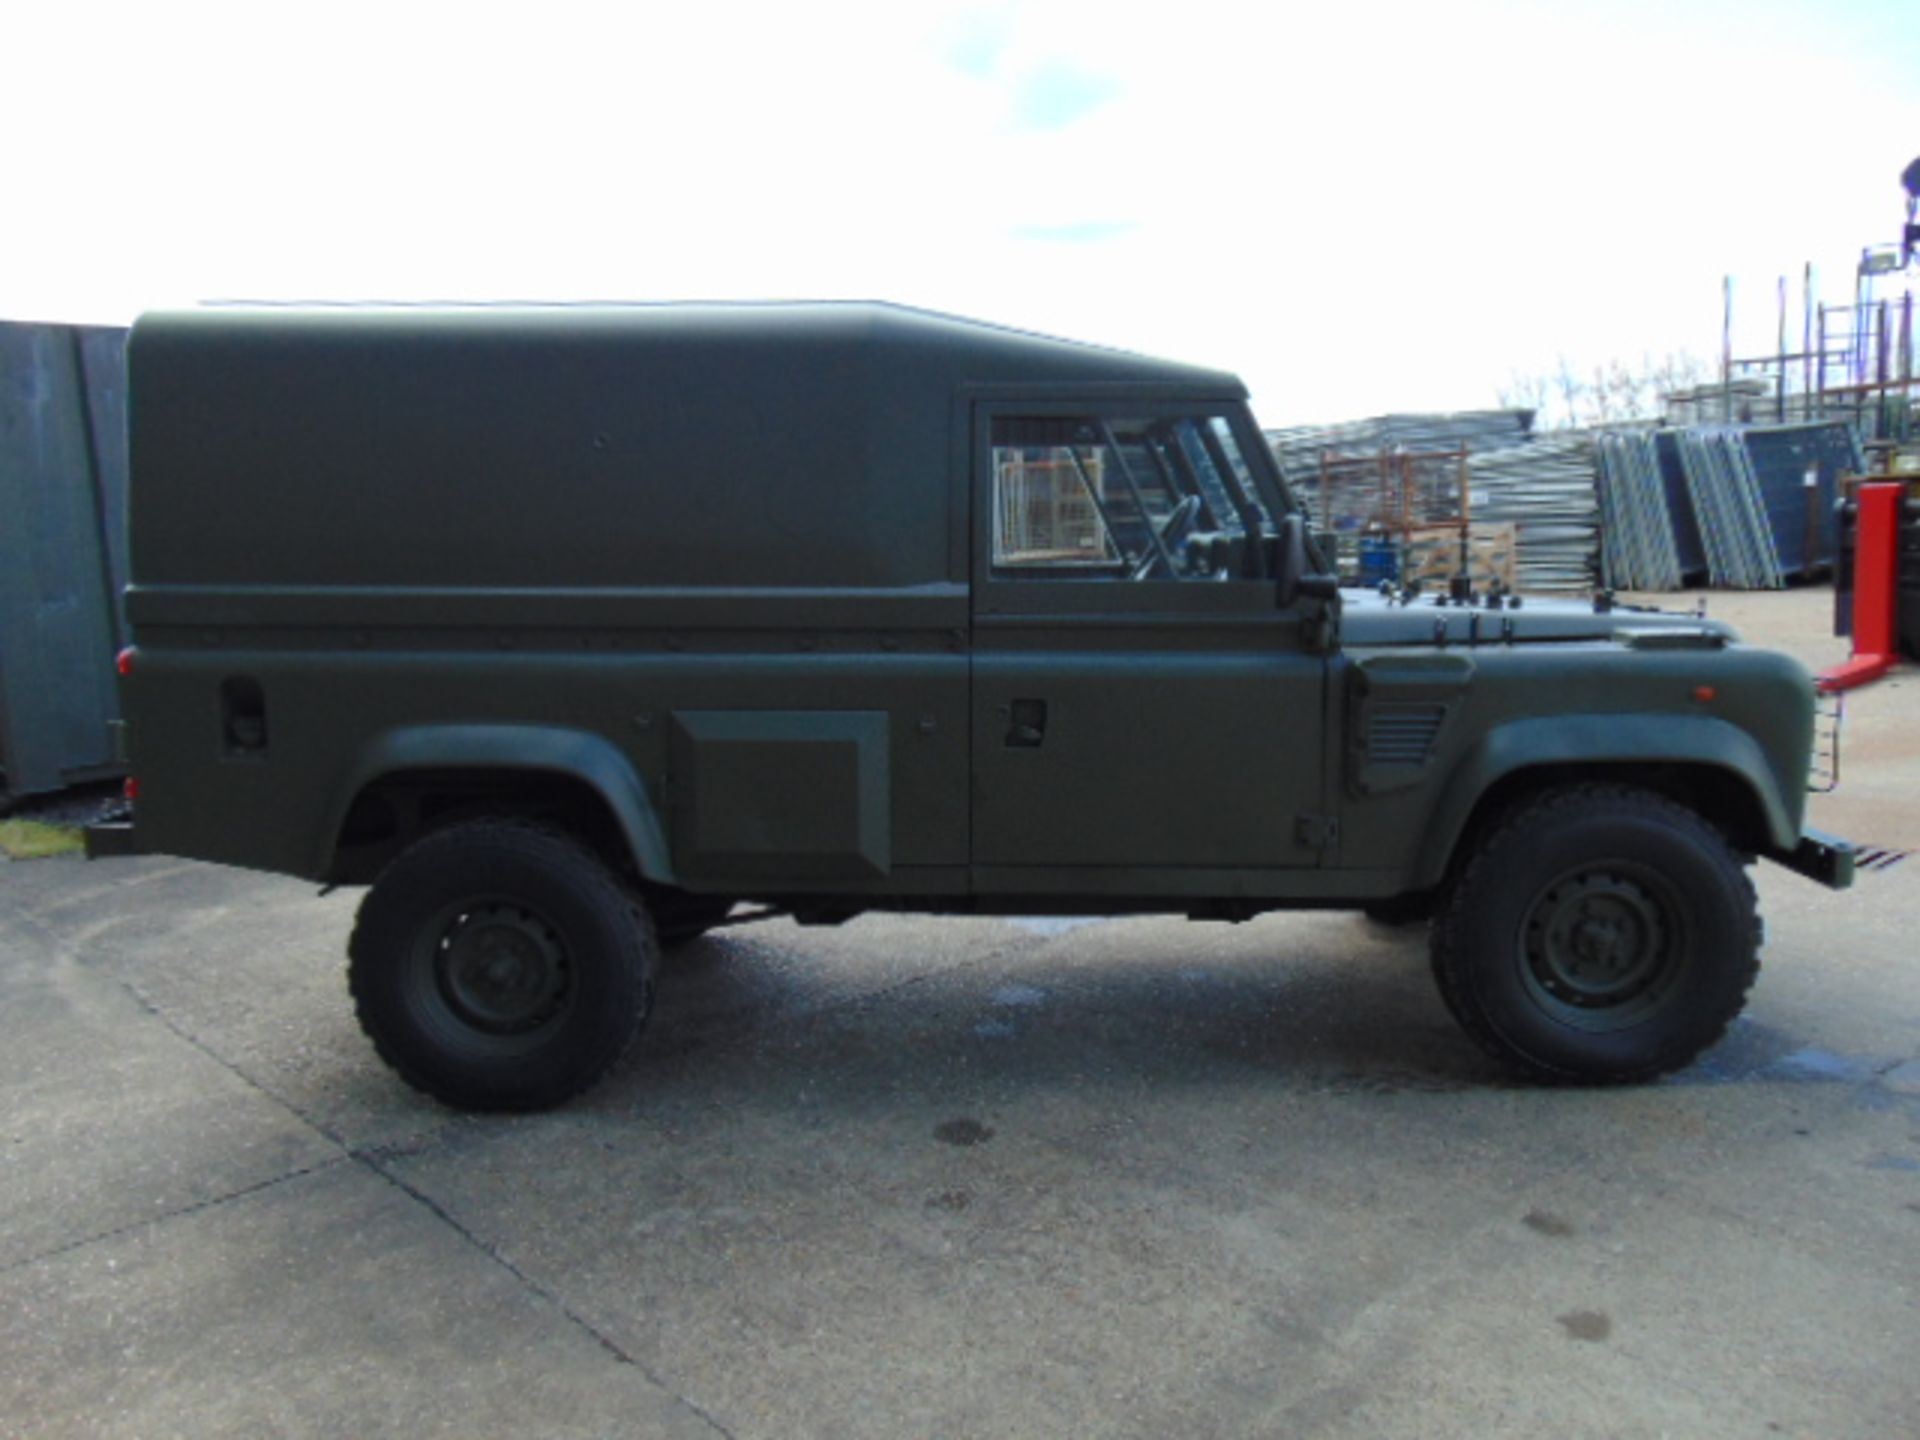 1998 Land Rover Wolf 110 Hard Top with Remus upgrade - Image 4 of 32